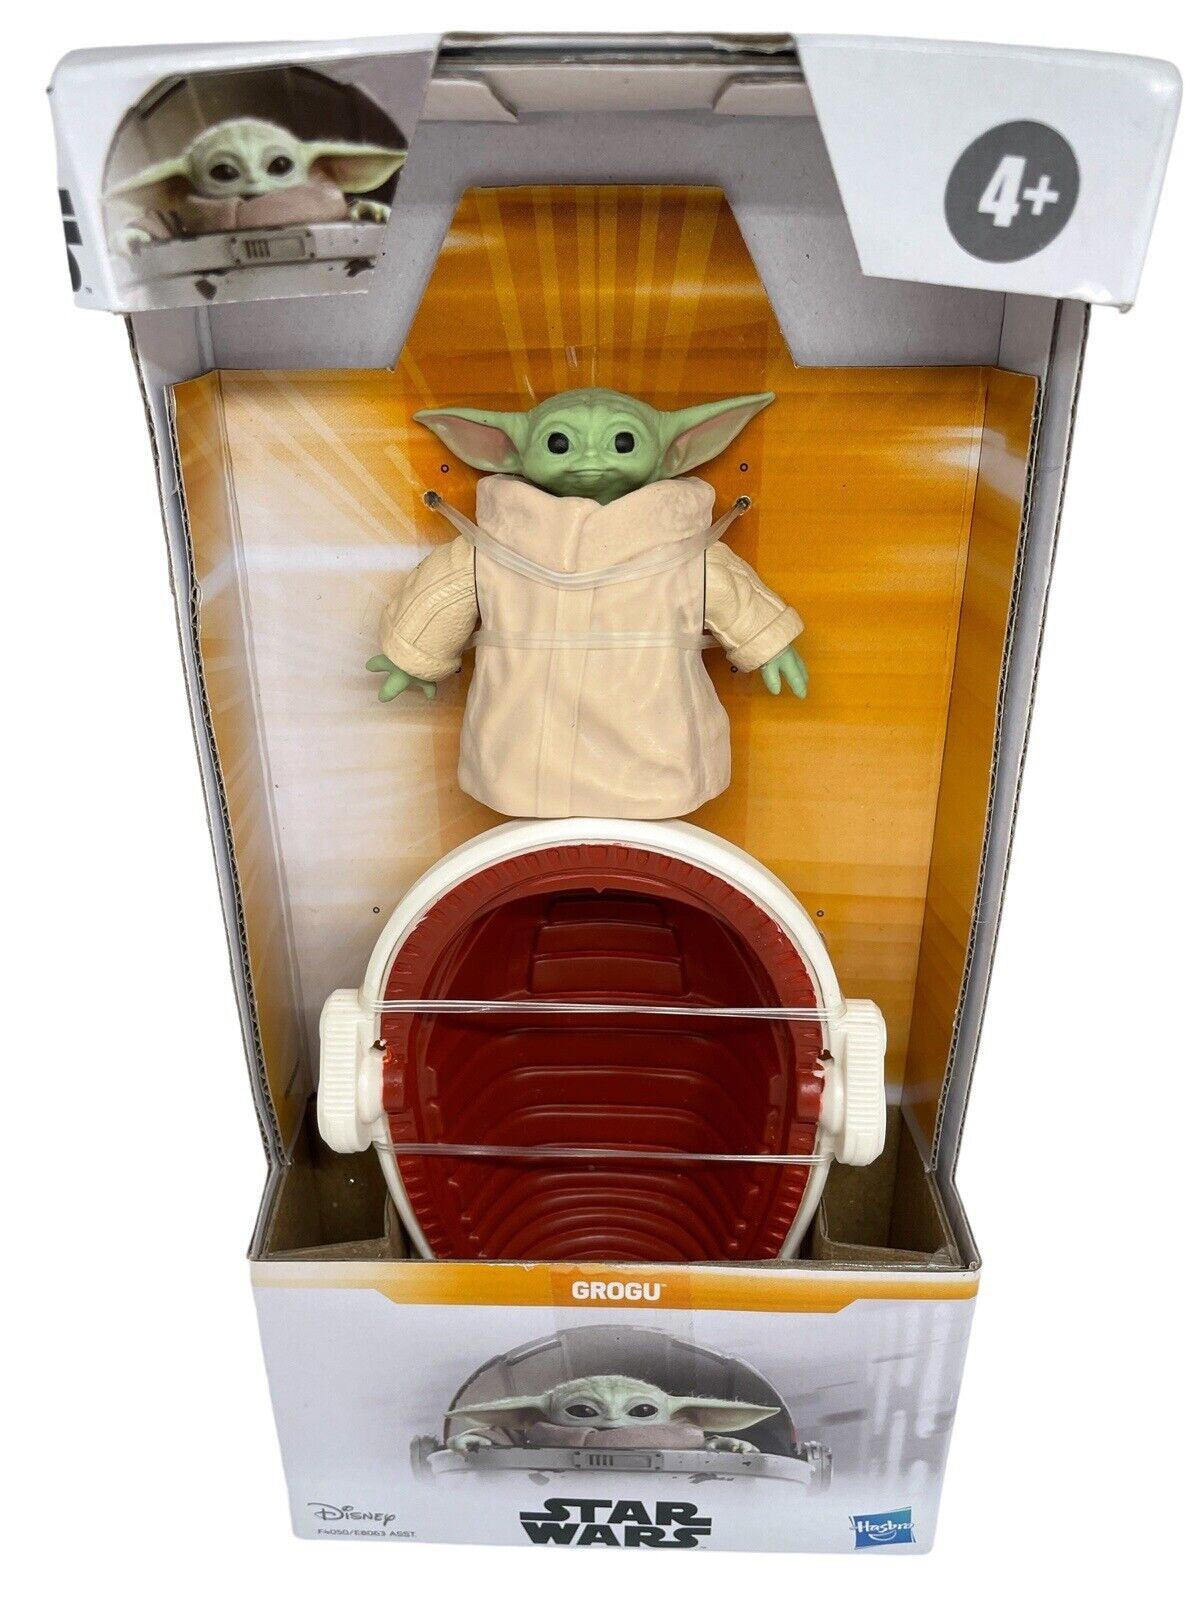 Star Wars Grogu Toy 9.5-Inch Scale Action Figure